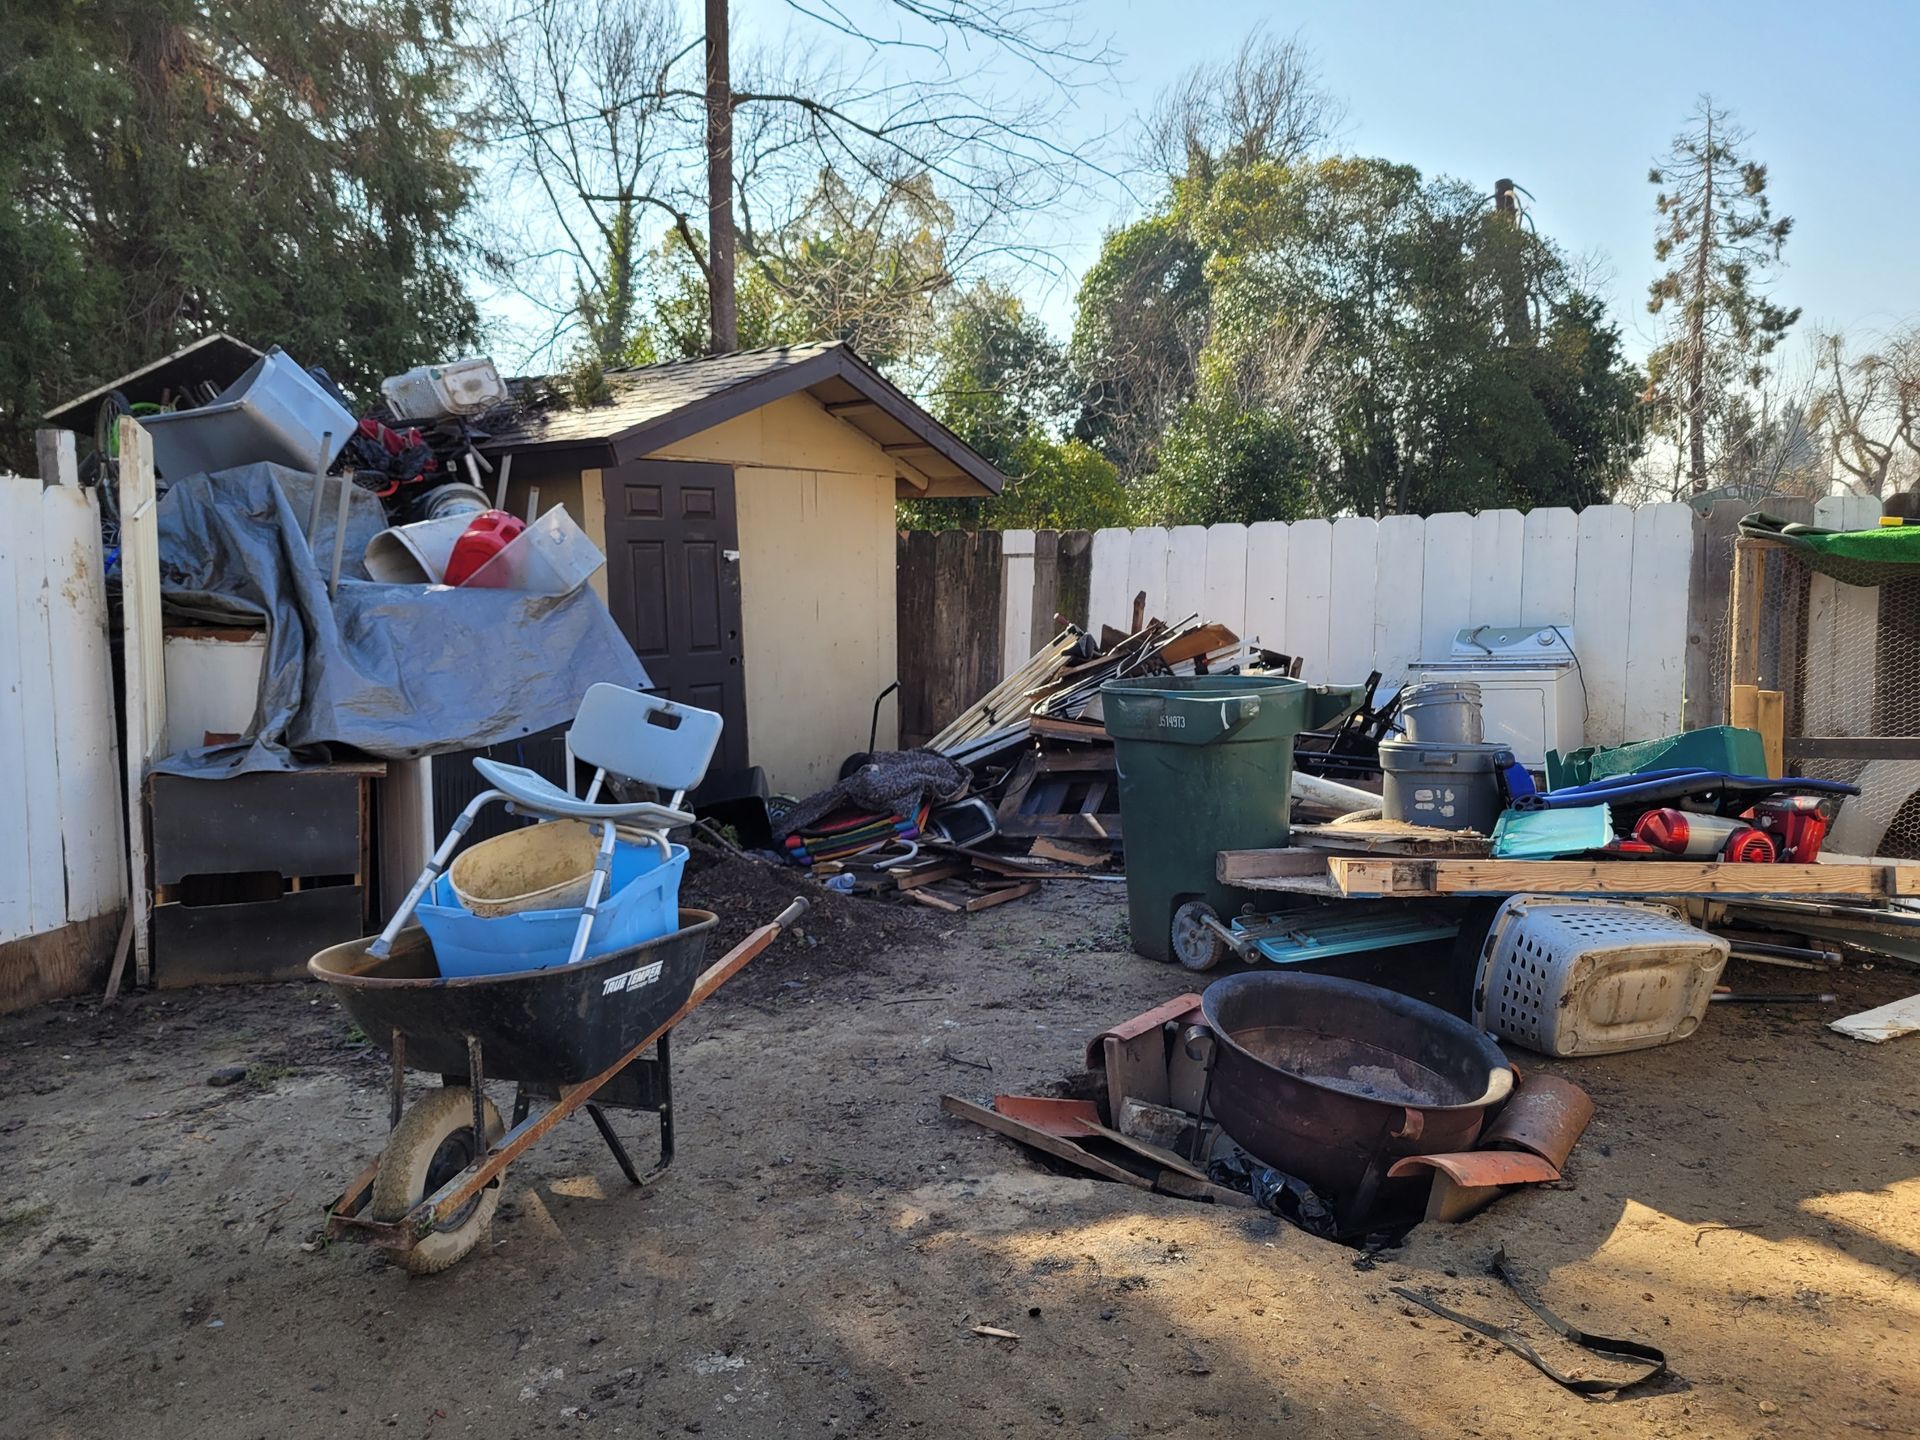 Pile of trash that is stacked as high as the shed its next to with other various items laid out in front of the shed